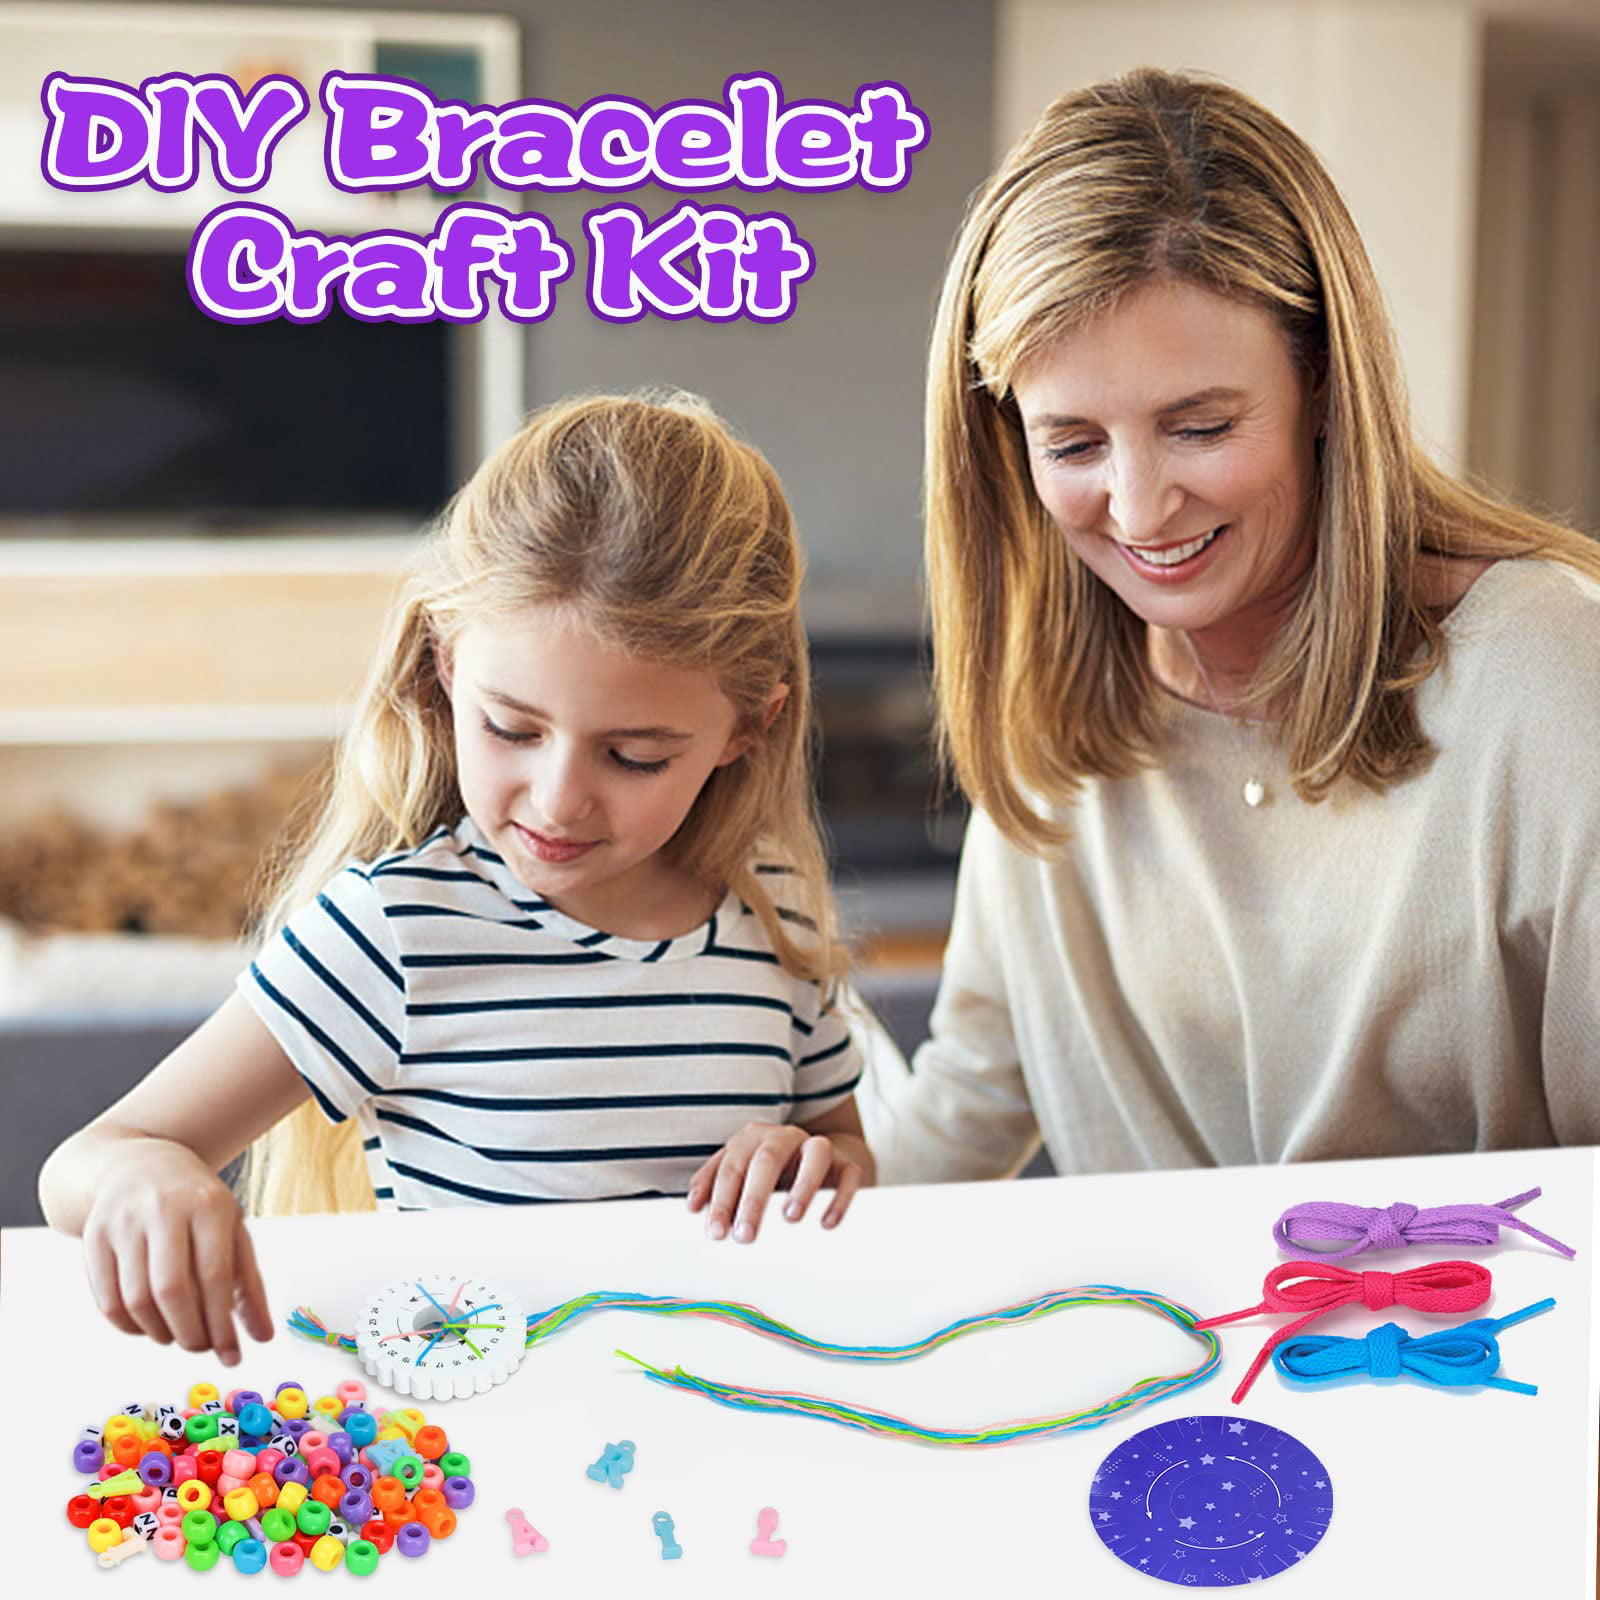 6 7 8 9 10 Year Old Girls Gifts Birthday Crafts Gifts for 6 7 8 Girls Gifts  Toys 7 8 9 10 Year Old Girls Bracelet Making Kits for Girls Rubber